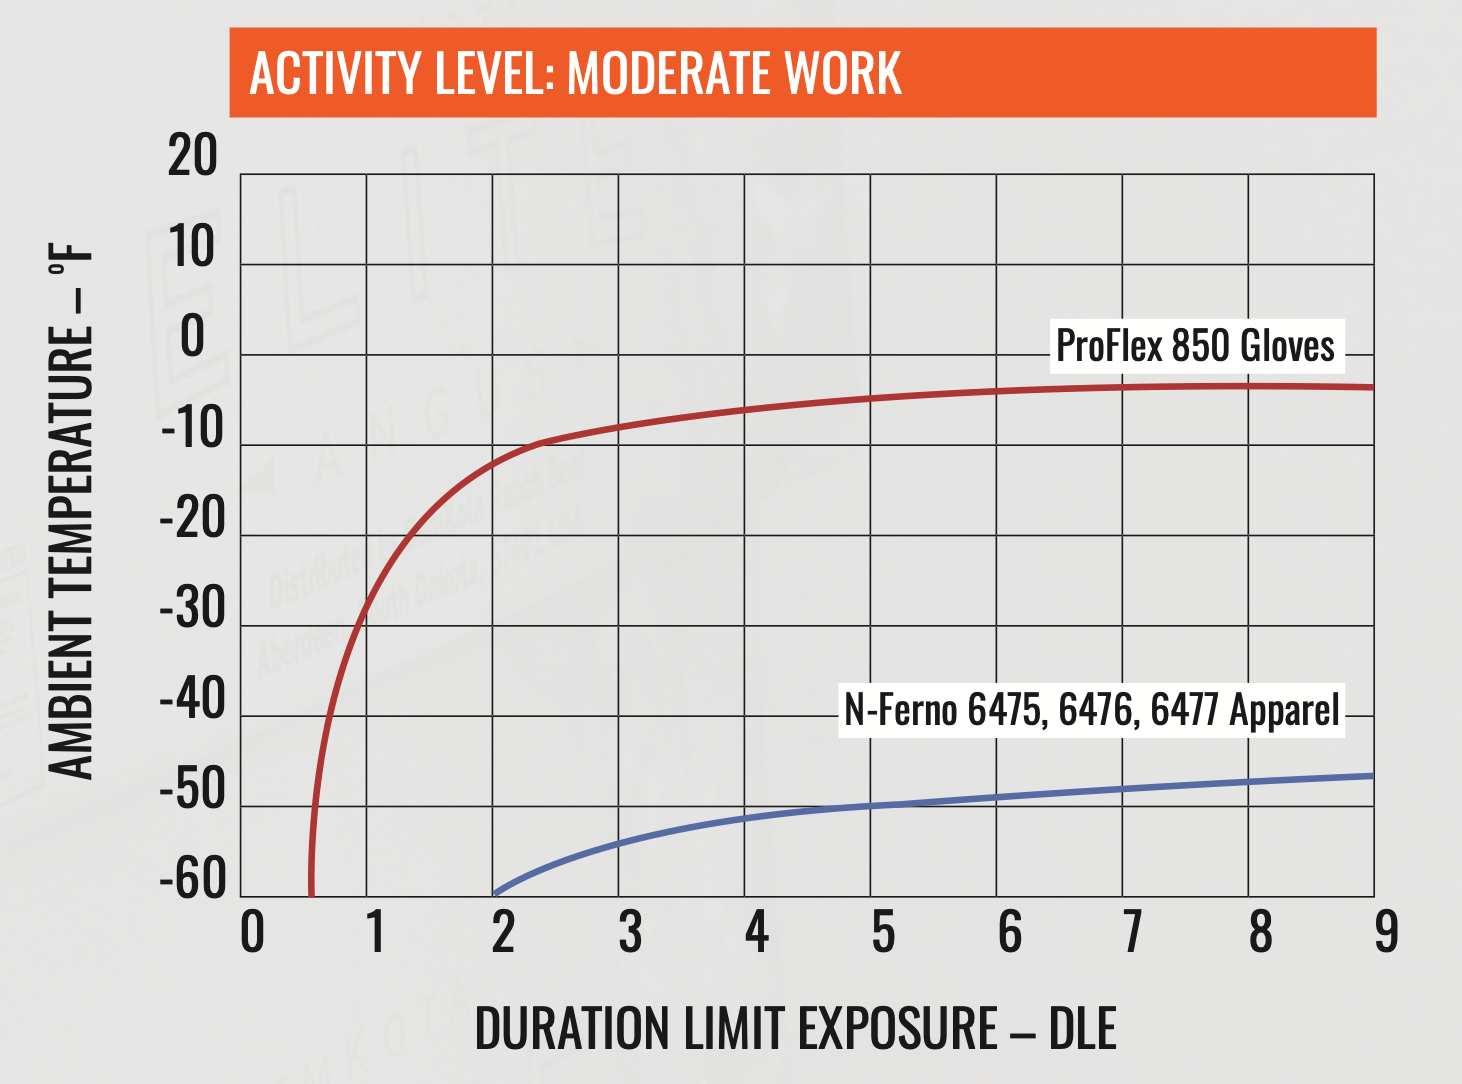 Thermal performance of Ergodyne Cold Storage Gear at a “Moderate” MET Level with temperature to the left and duration (in hours) at the bottom. For a 5-hour duration, N-Ferno Coveralls, Jacket and Bibs are rated to -50°F.